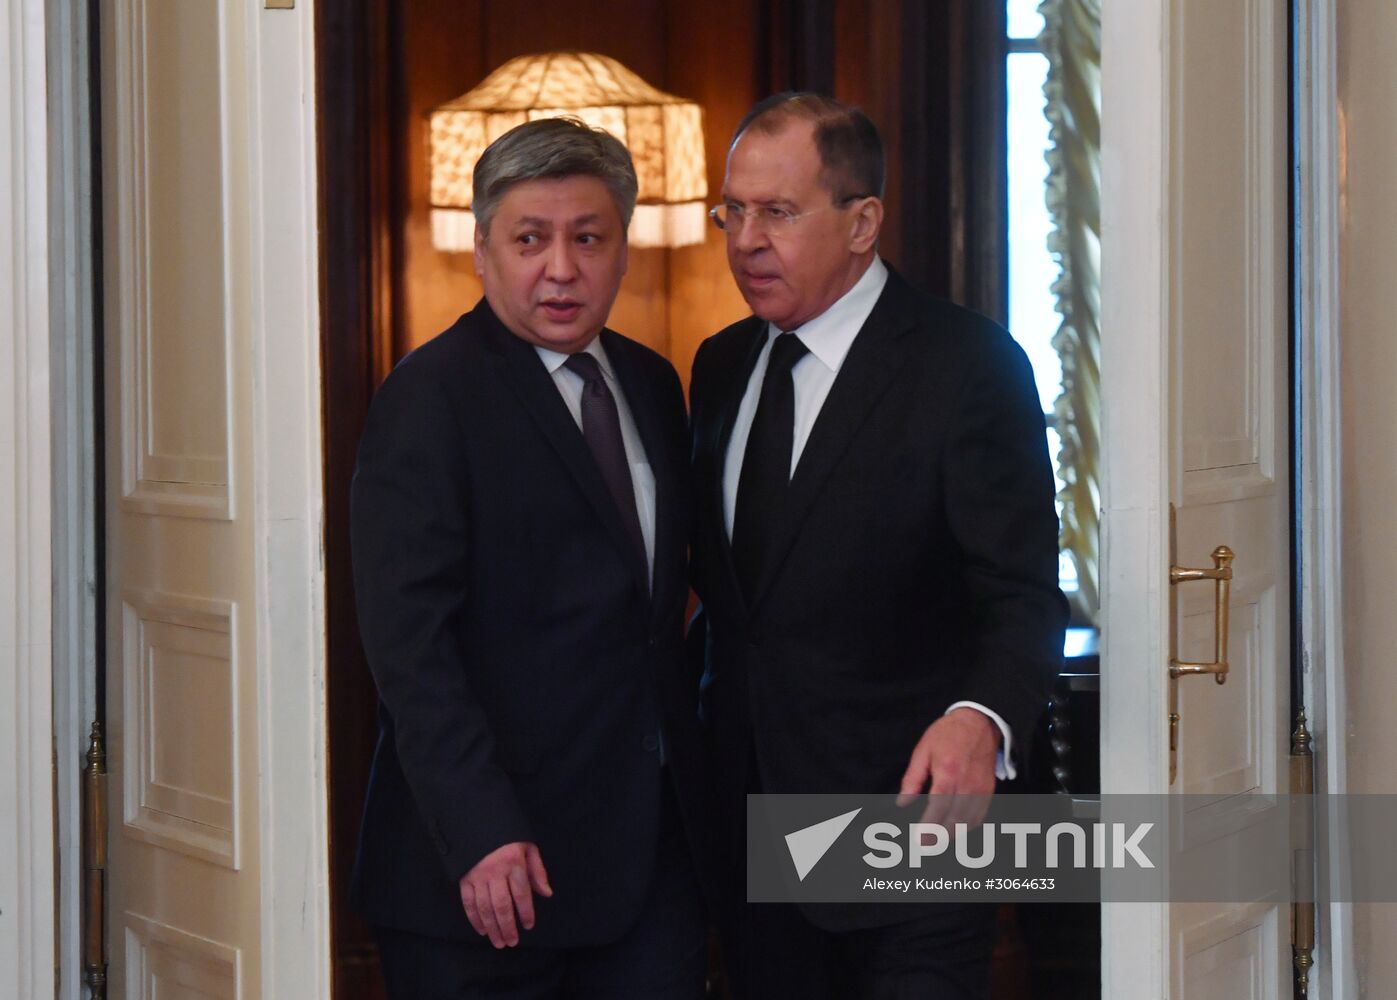 Sergei Lavrov meets with Kyrgyzstan's Foreign Minister Erlan Abdyldayev